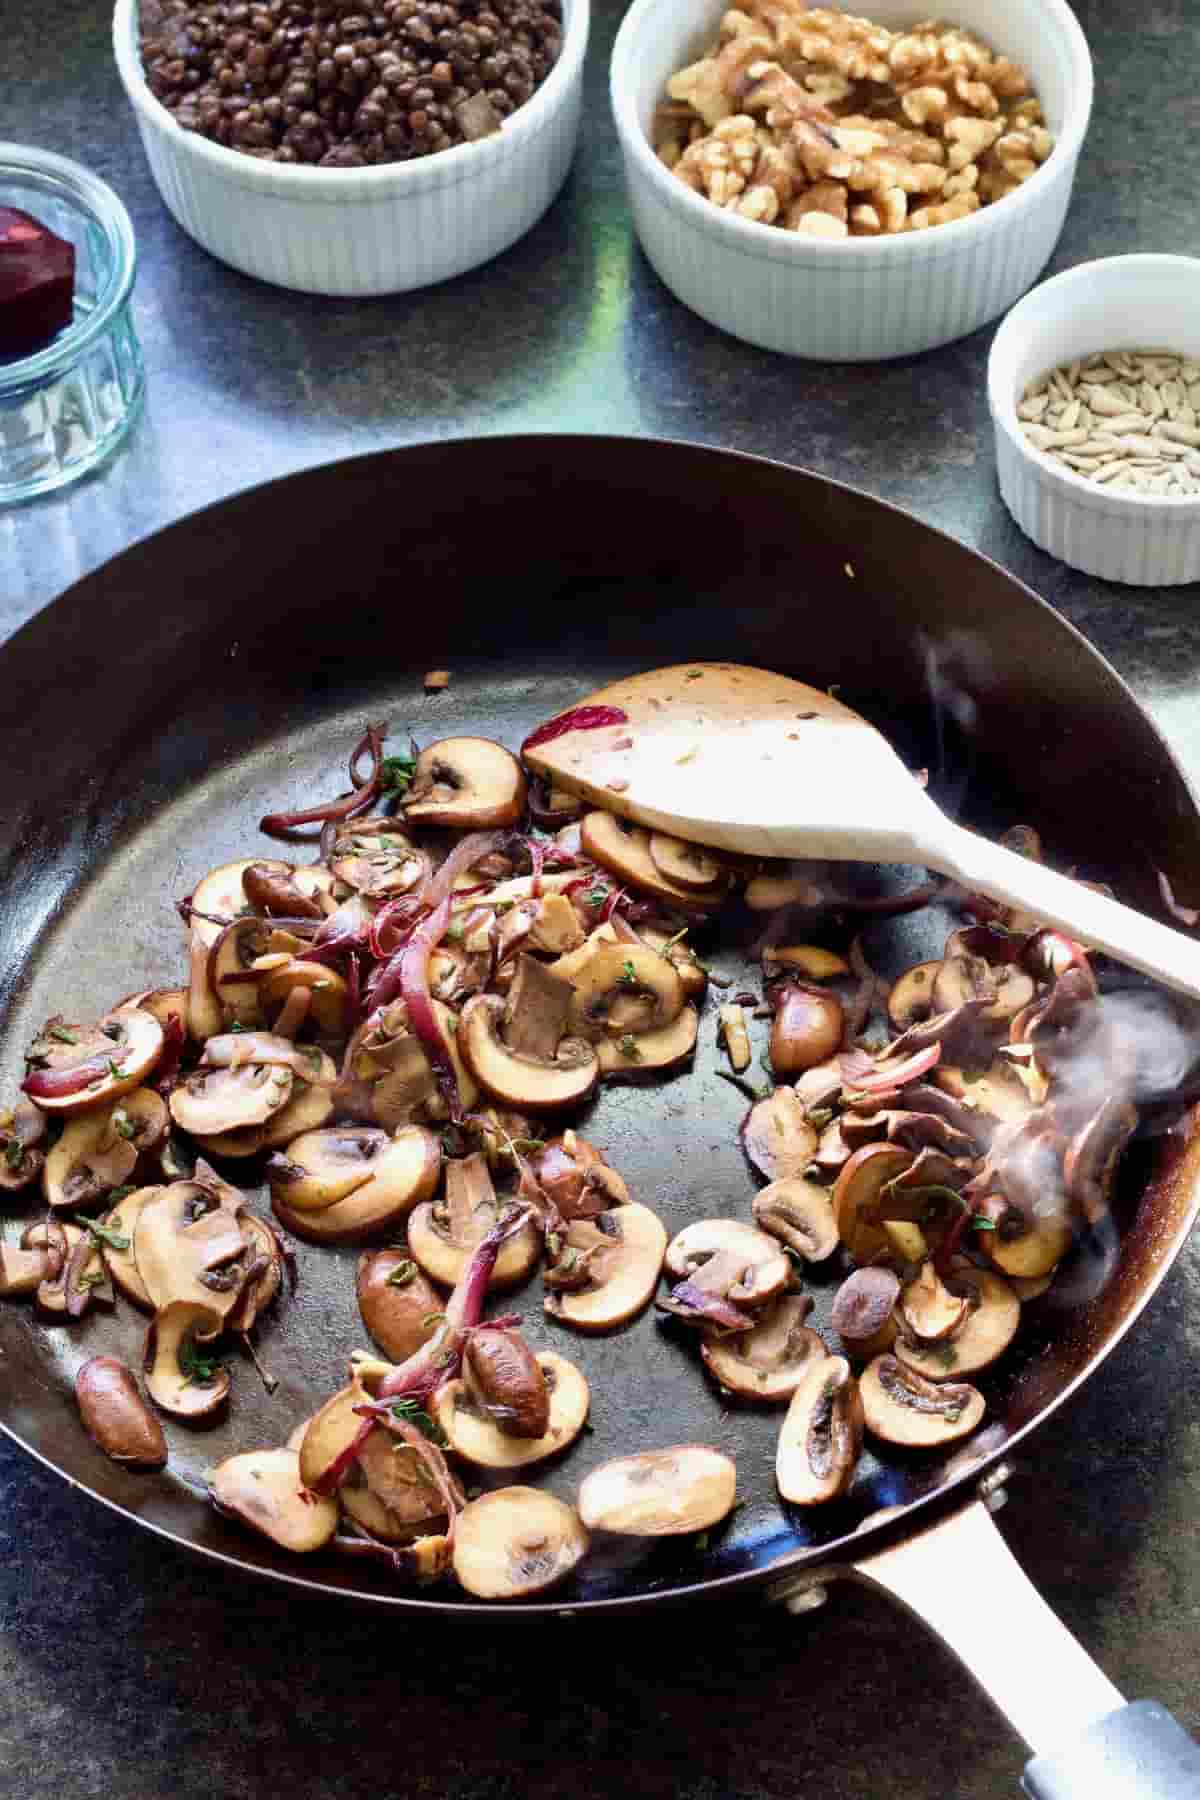 Cooked mushrooms and onions in a pan.